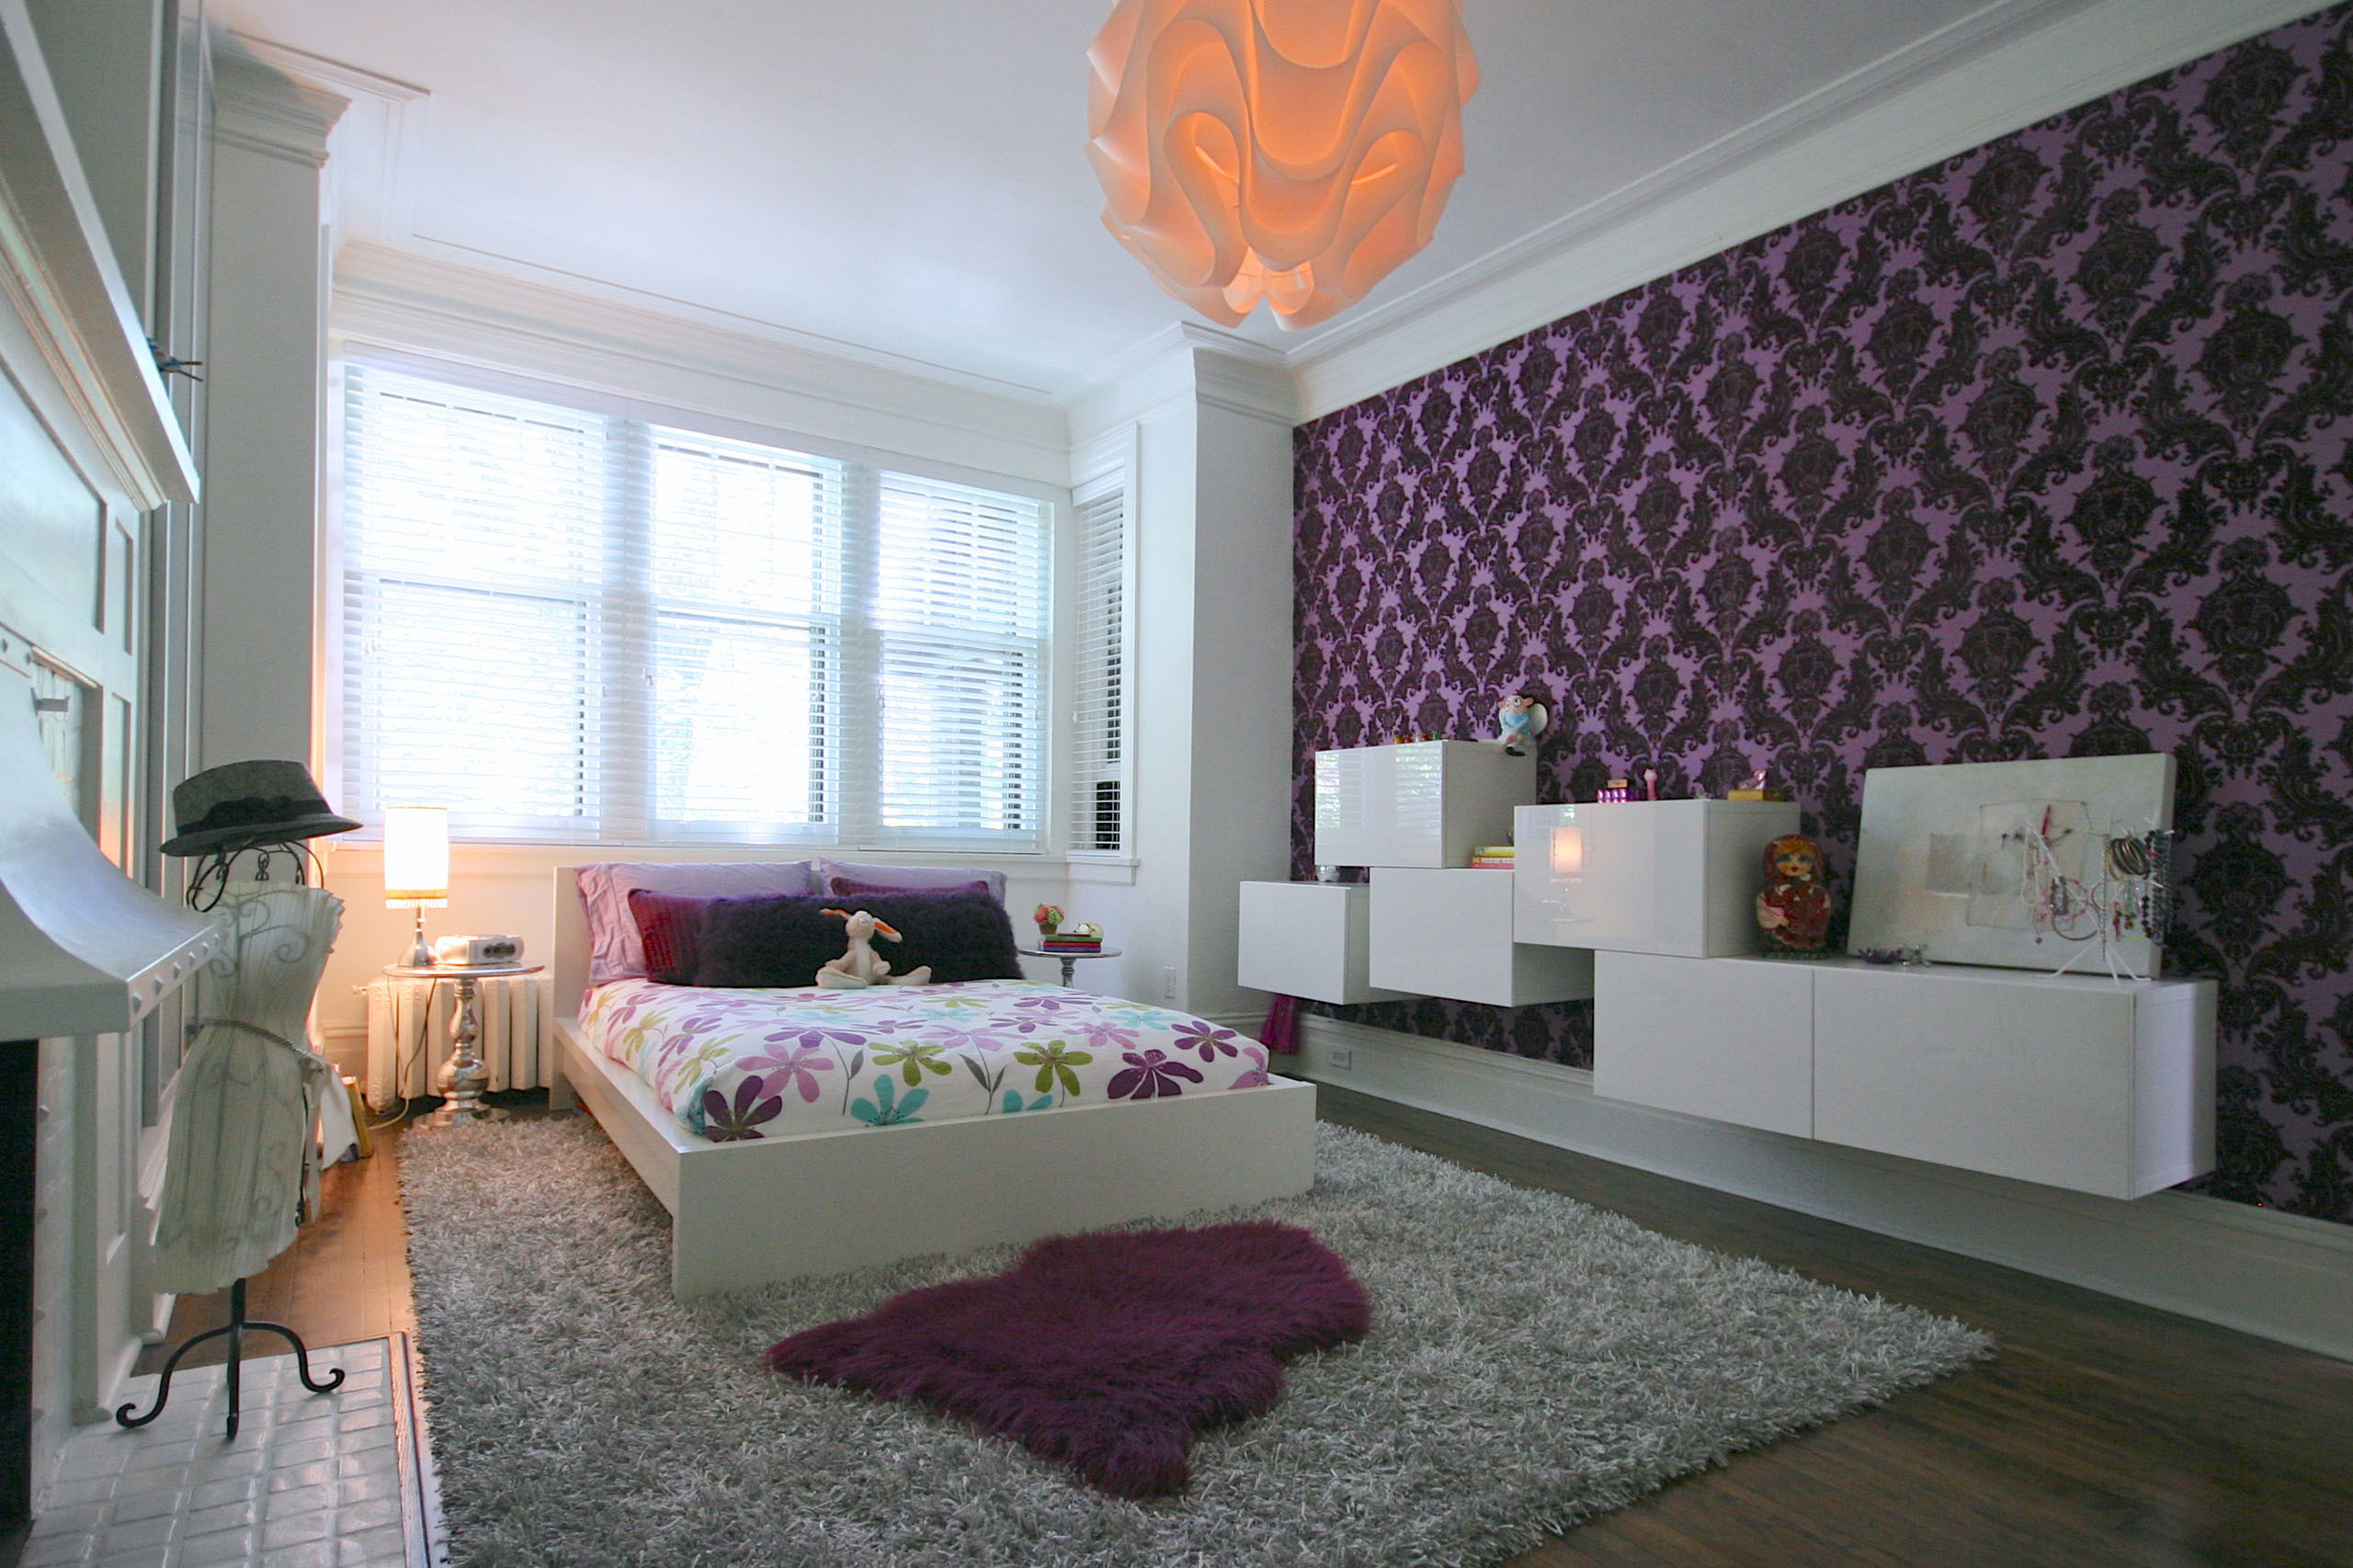 2560x1706 Cool Teen Bedrooms For Your Home Ideas : Beautiful Girl Wallpaper Design  Ideas For Cool Teen